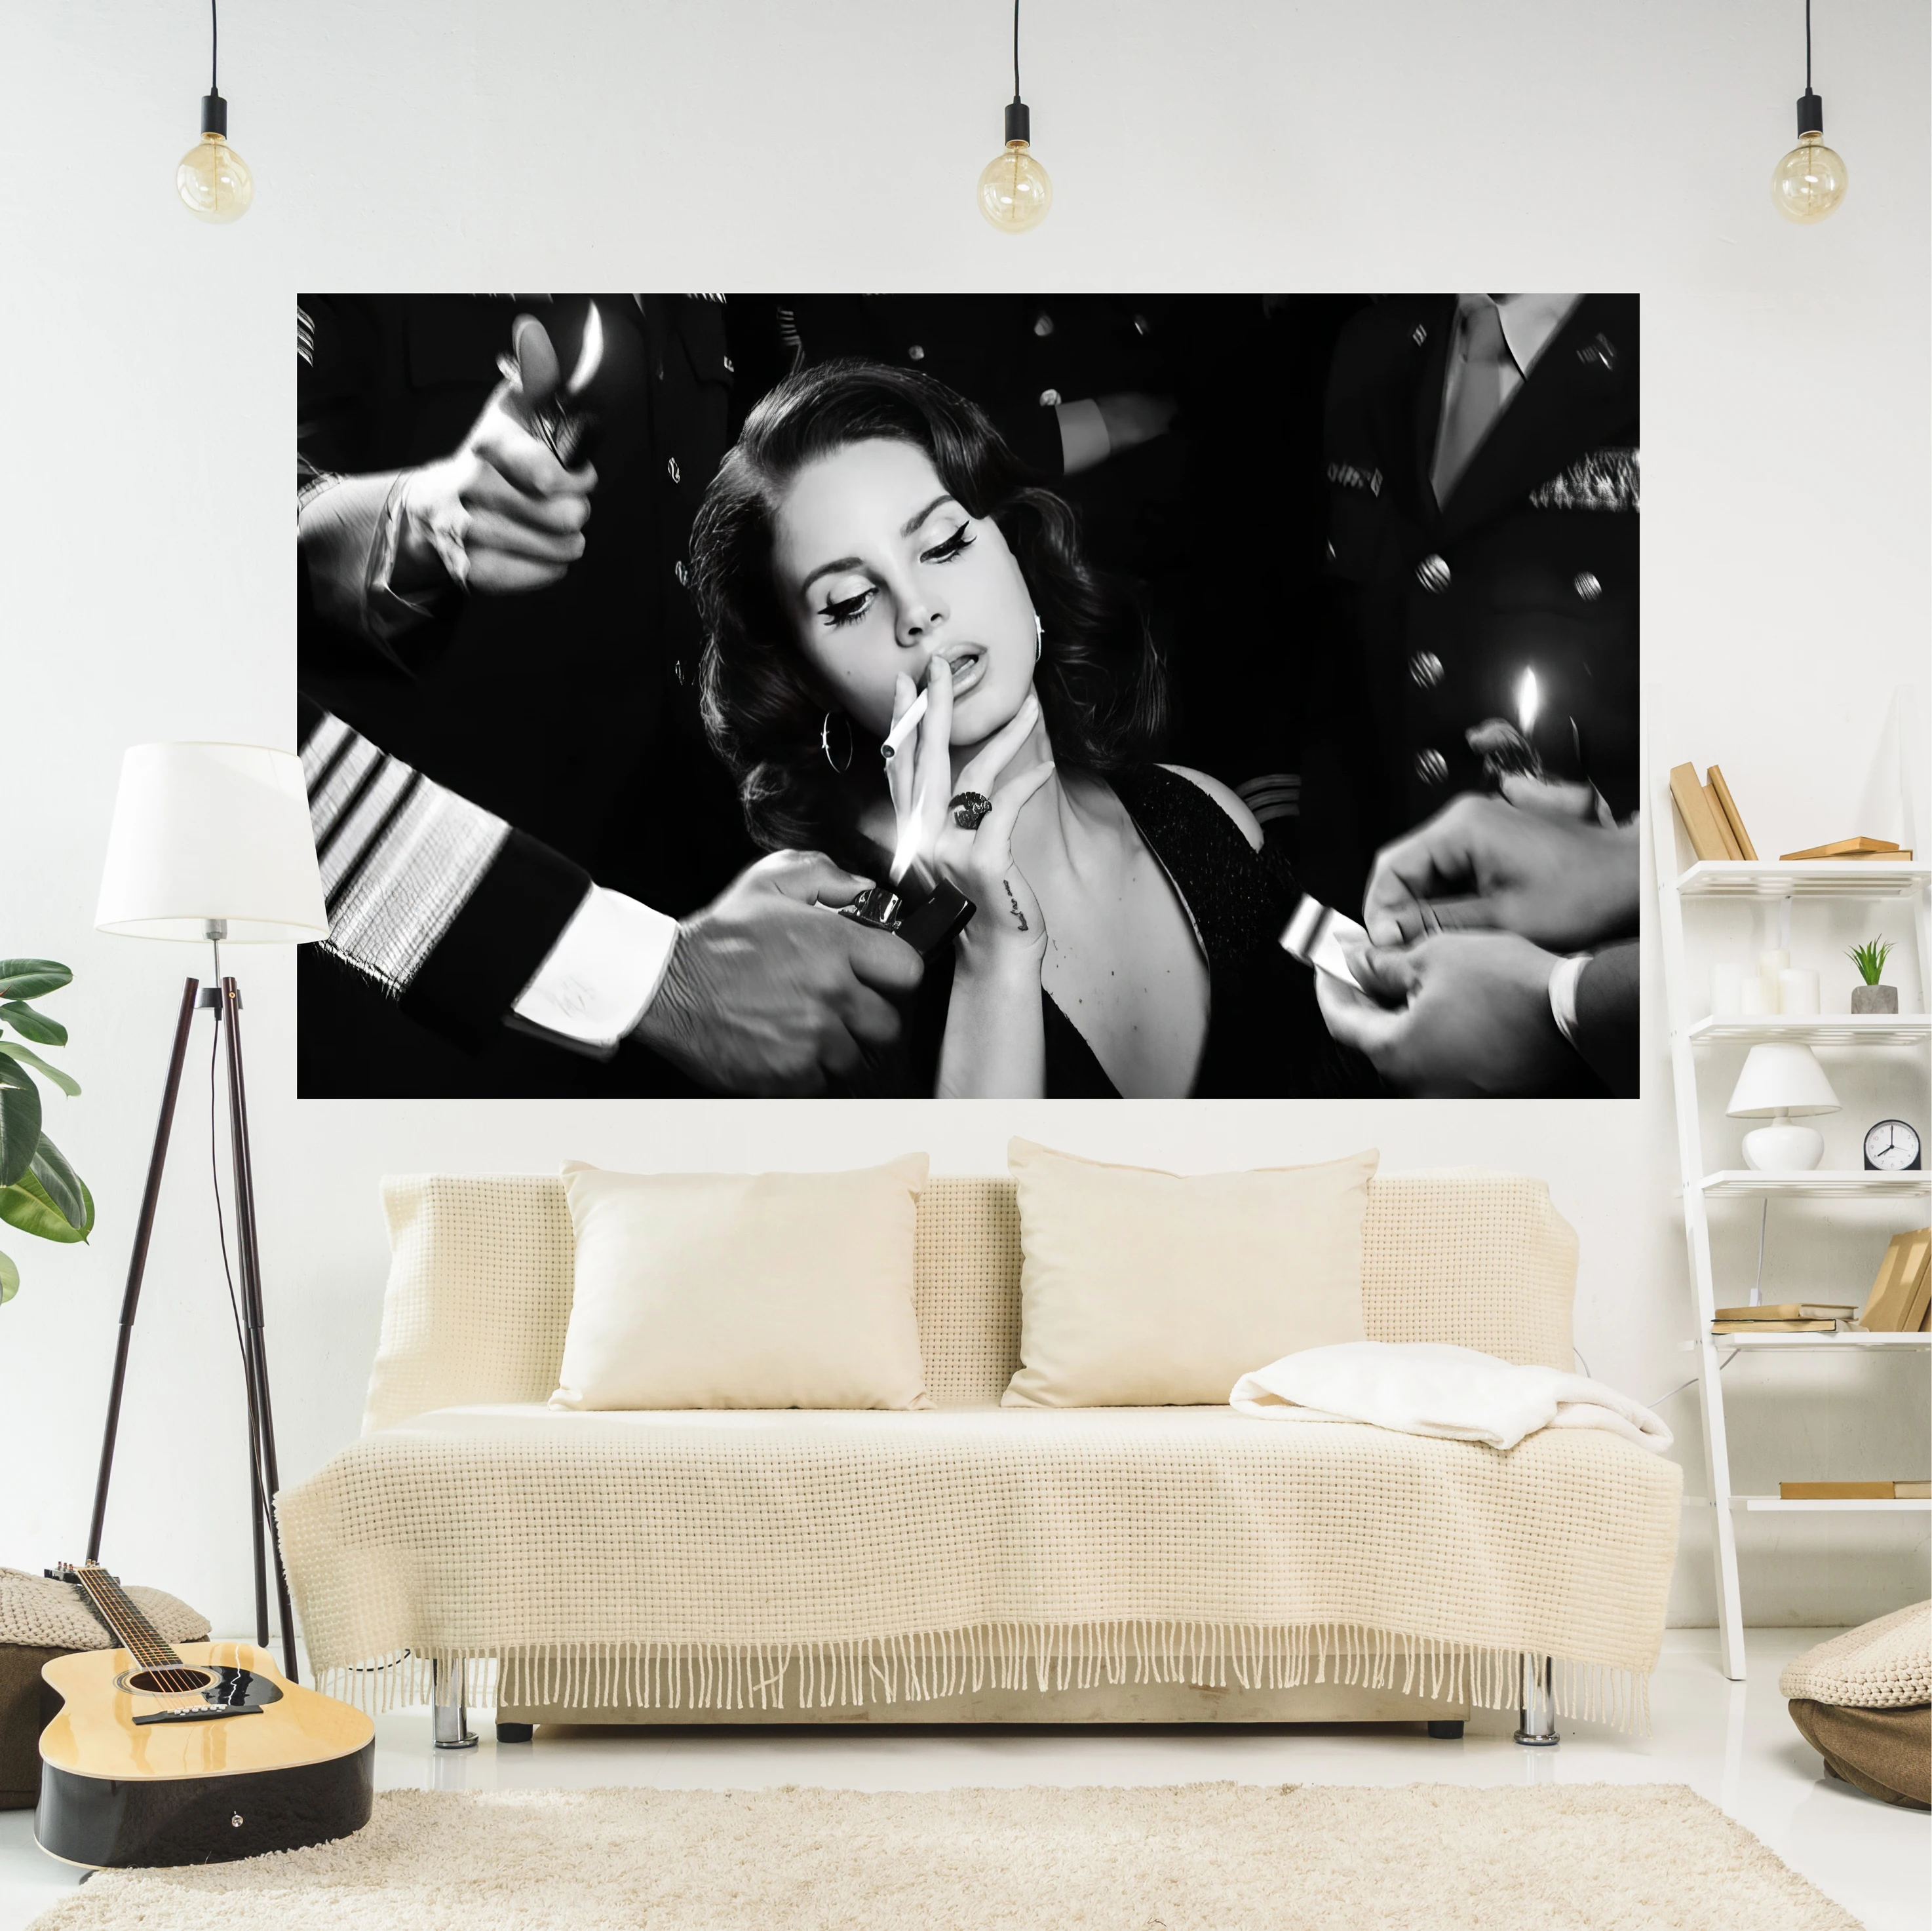 Lana Del Rey Poster Tapestry Wall Decor Hippie Rapper Smoking Printed Art Aesthetic Bedroom Or Home For Decoration